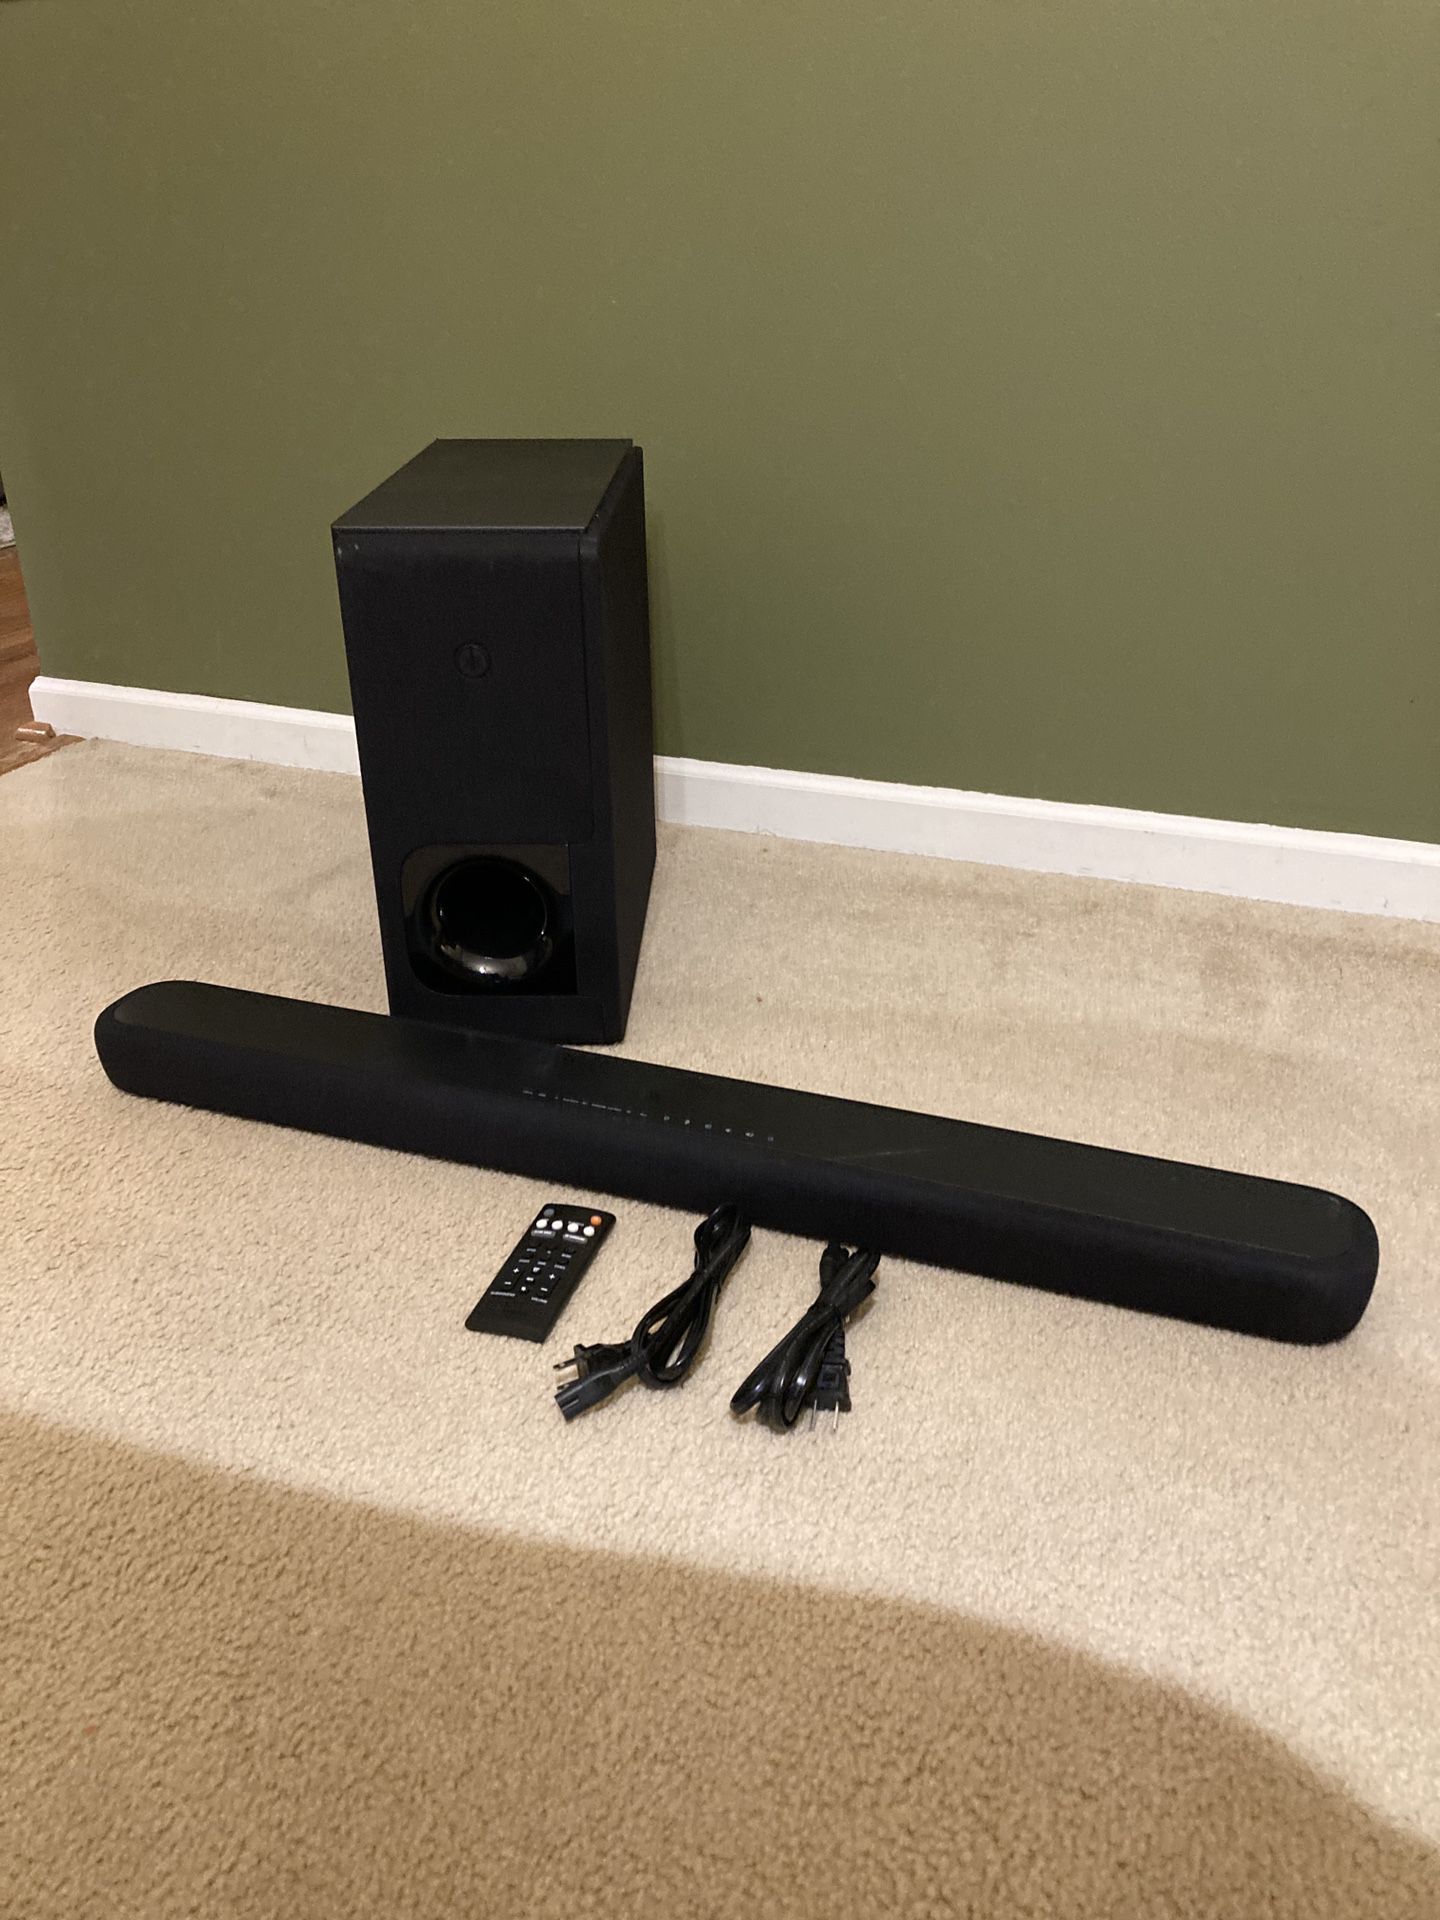 YAS-209 sound bar System wireless subwoofer NS-WSW44 Remote USED Sale in Williamsburg, - OfferUp